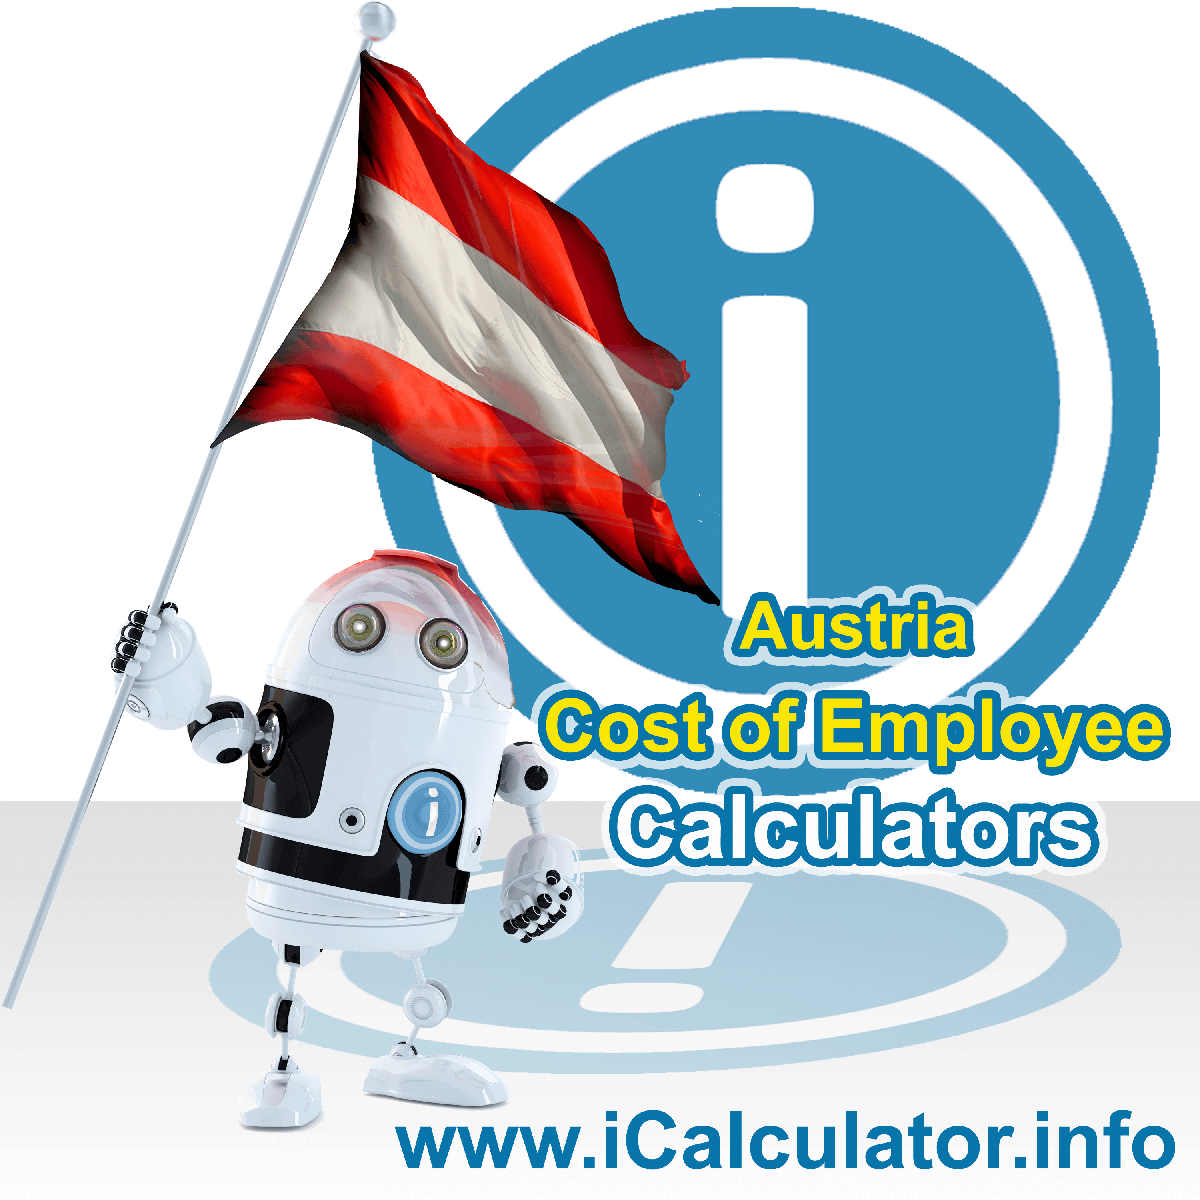 True Cost of an Employee in Austria Calculator. This image shows a new employer in Austria looking hiring a new employee, they calculate the cost of hiring an employee in Austria using the True Cost of an Employee in Austria calculator to understand their employment cost in Austria in 2023